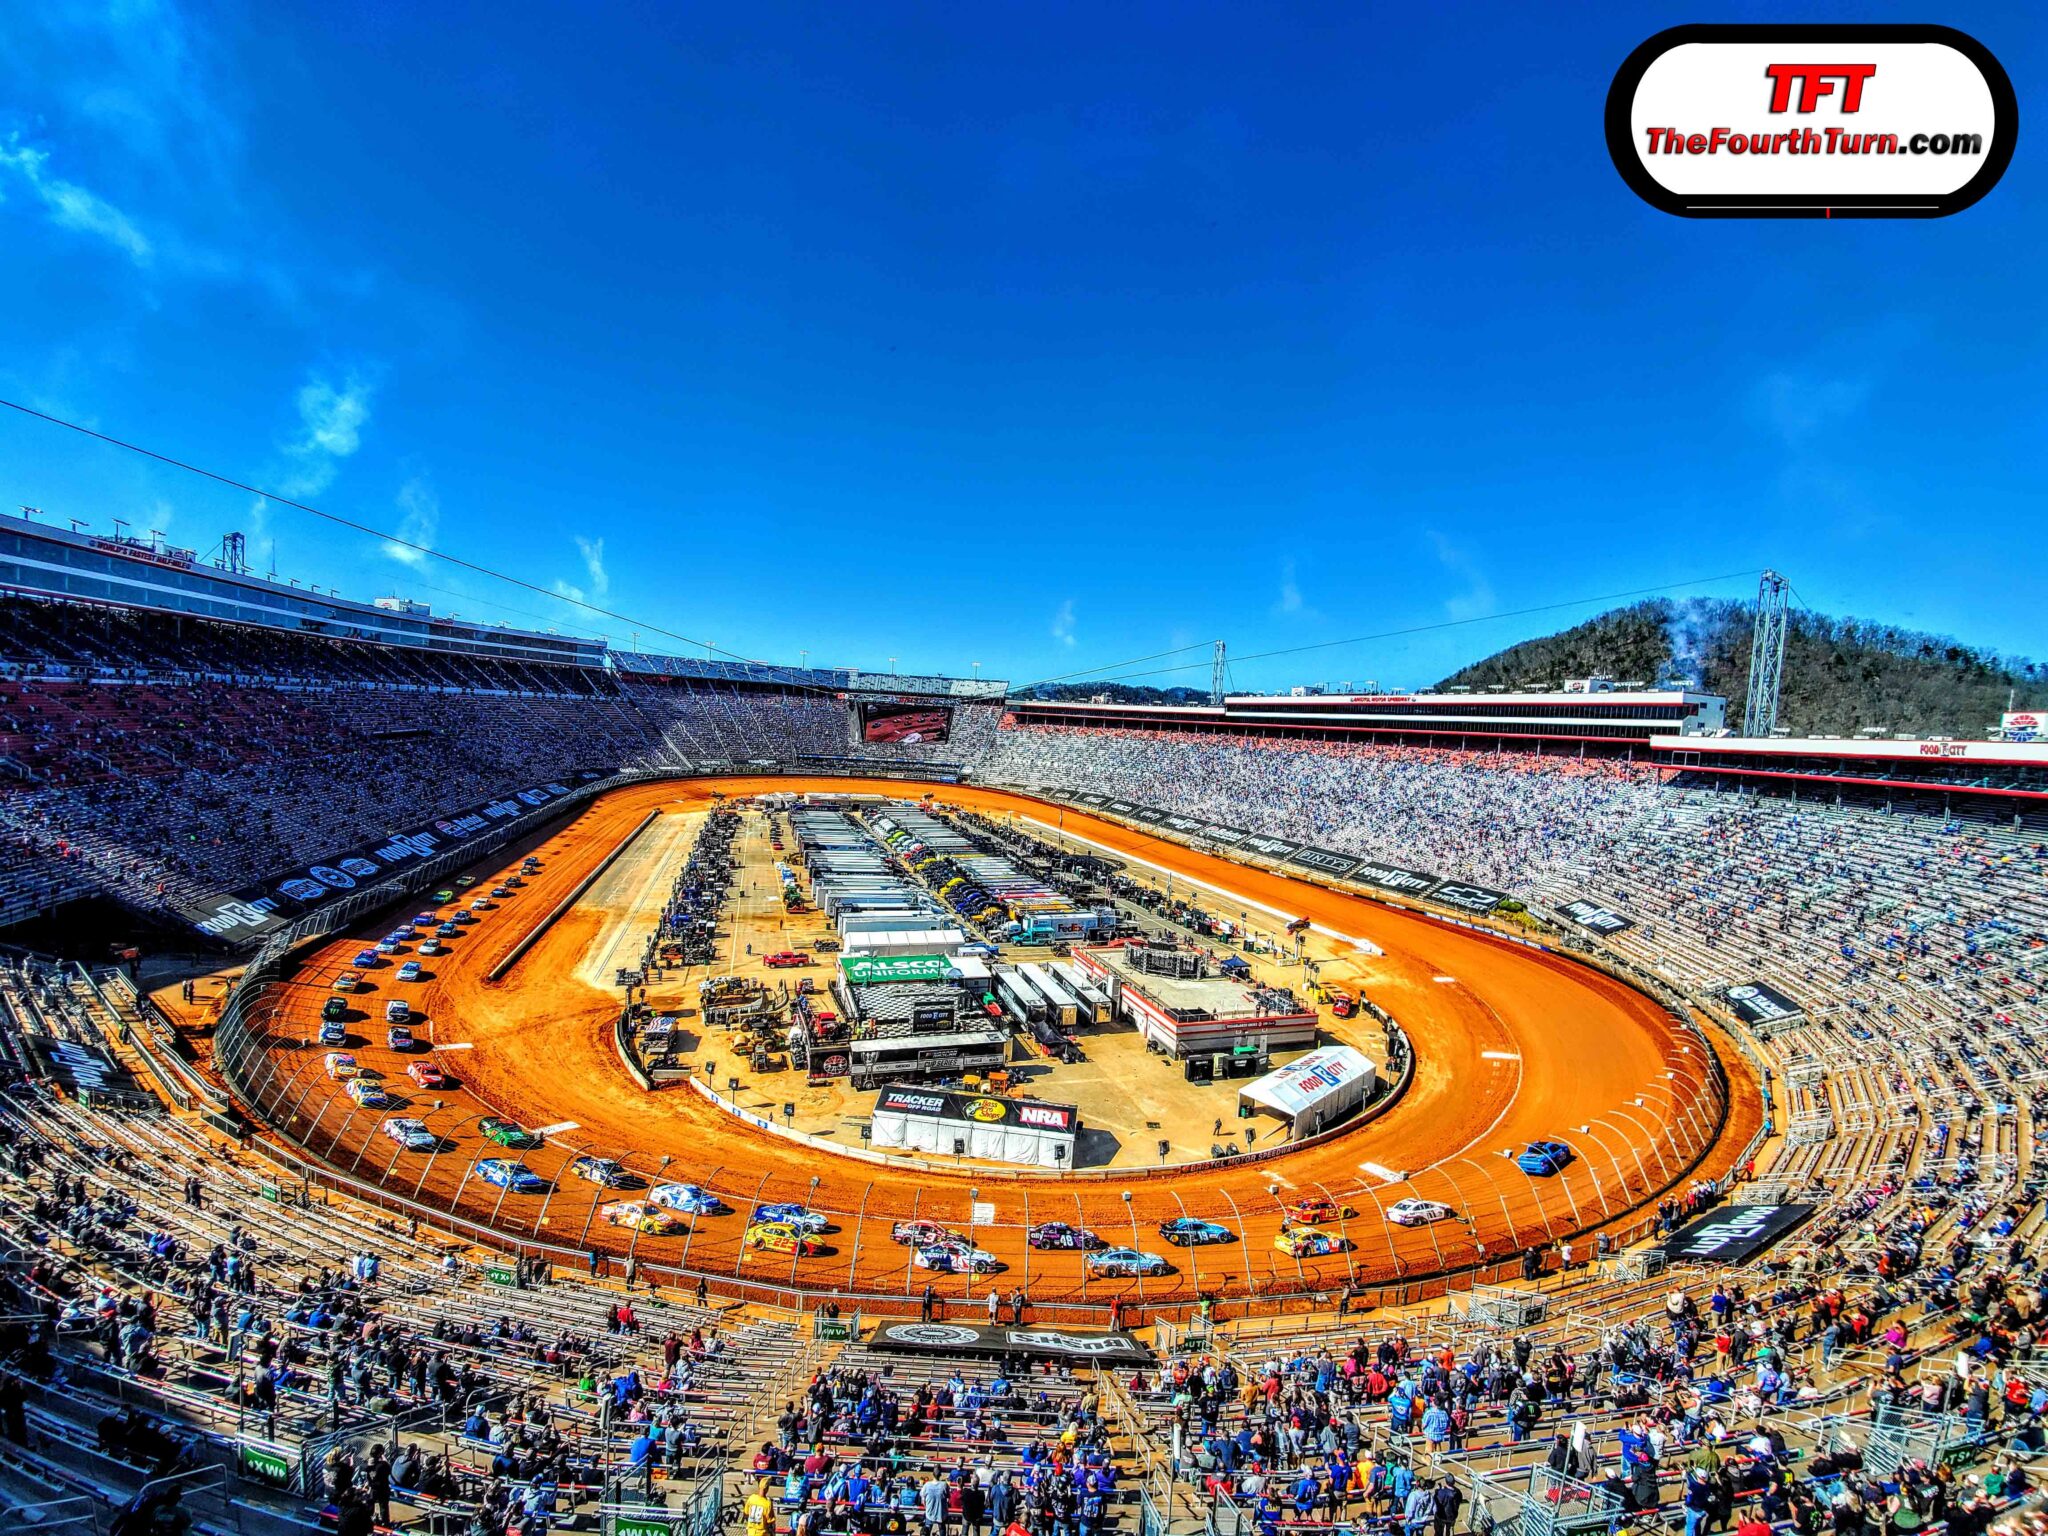 Photos From The Press Box Inaugural NASCAR Dirt Races At Bristol Motor Speedway The Fourth Turn